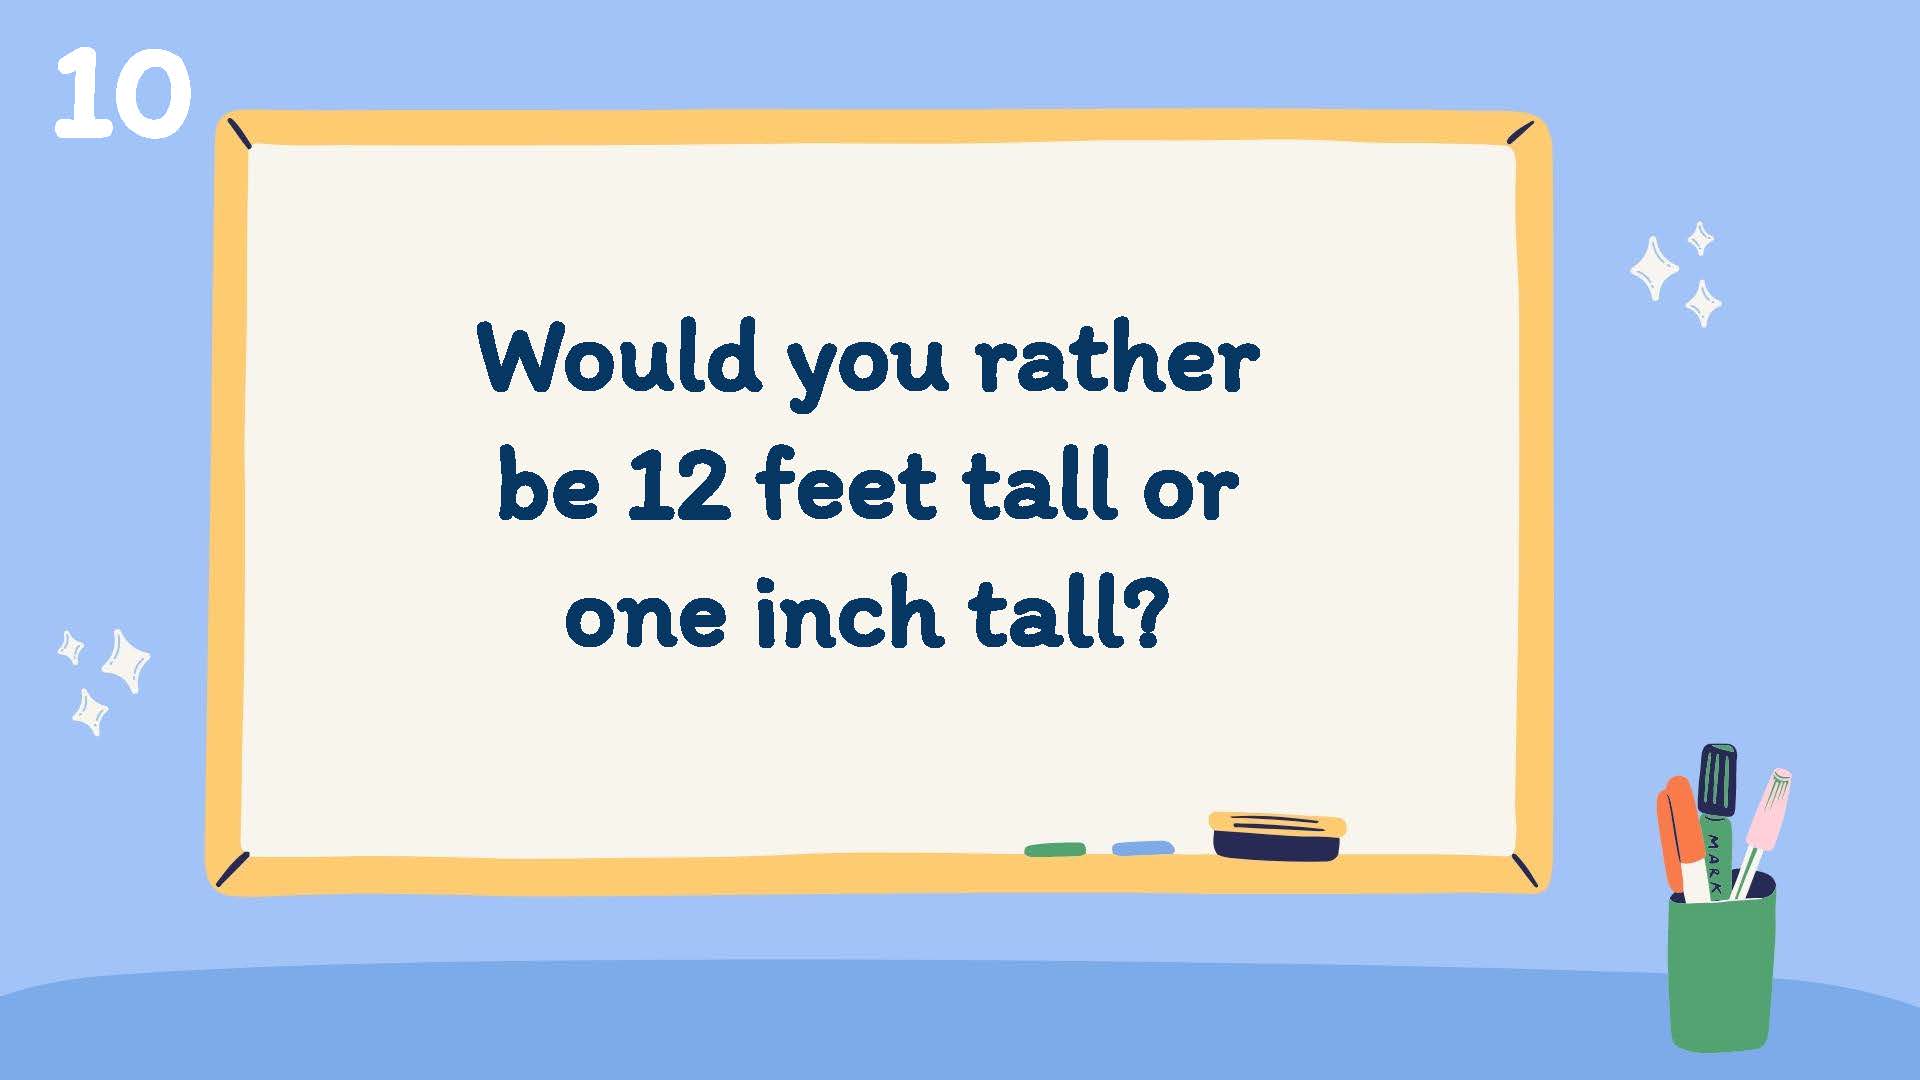 50 Would You Rather Scenarios For Elementary Students